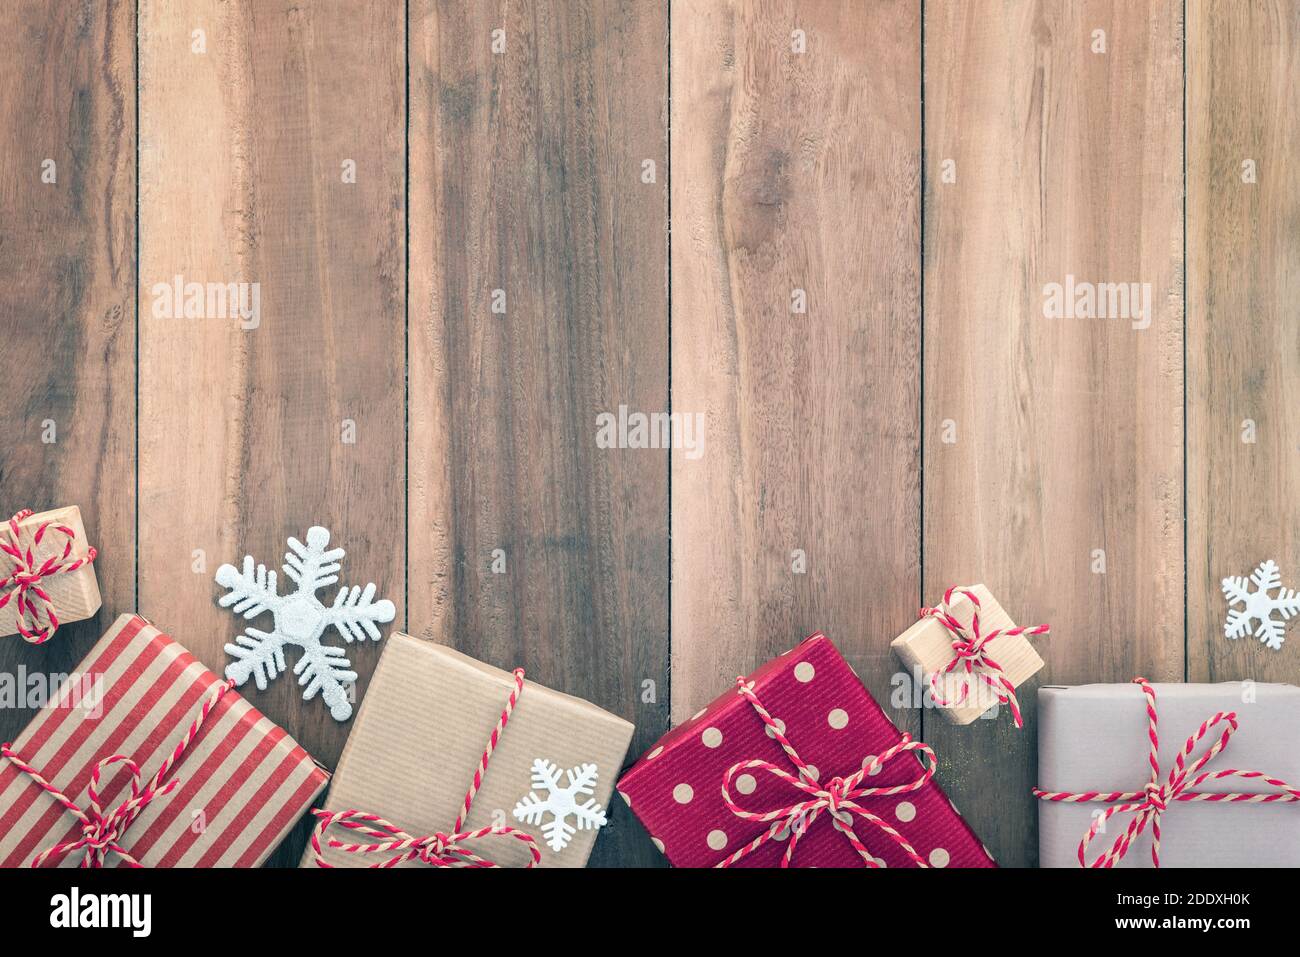 Gift boxes and Christmas ornaments, border design, on wood blackboard Stock Photo